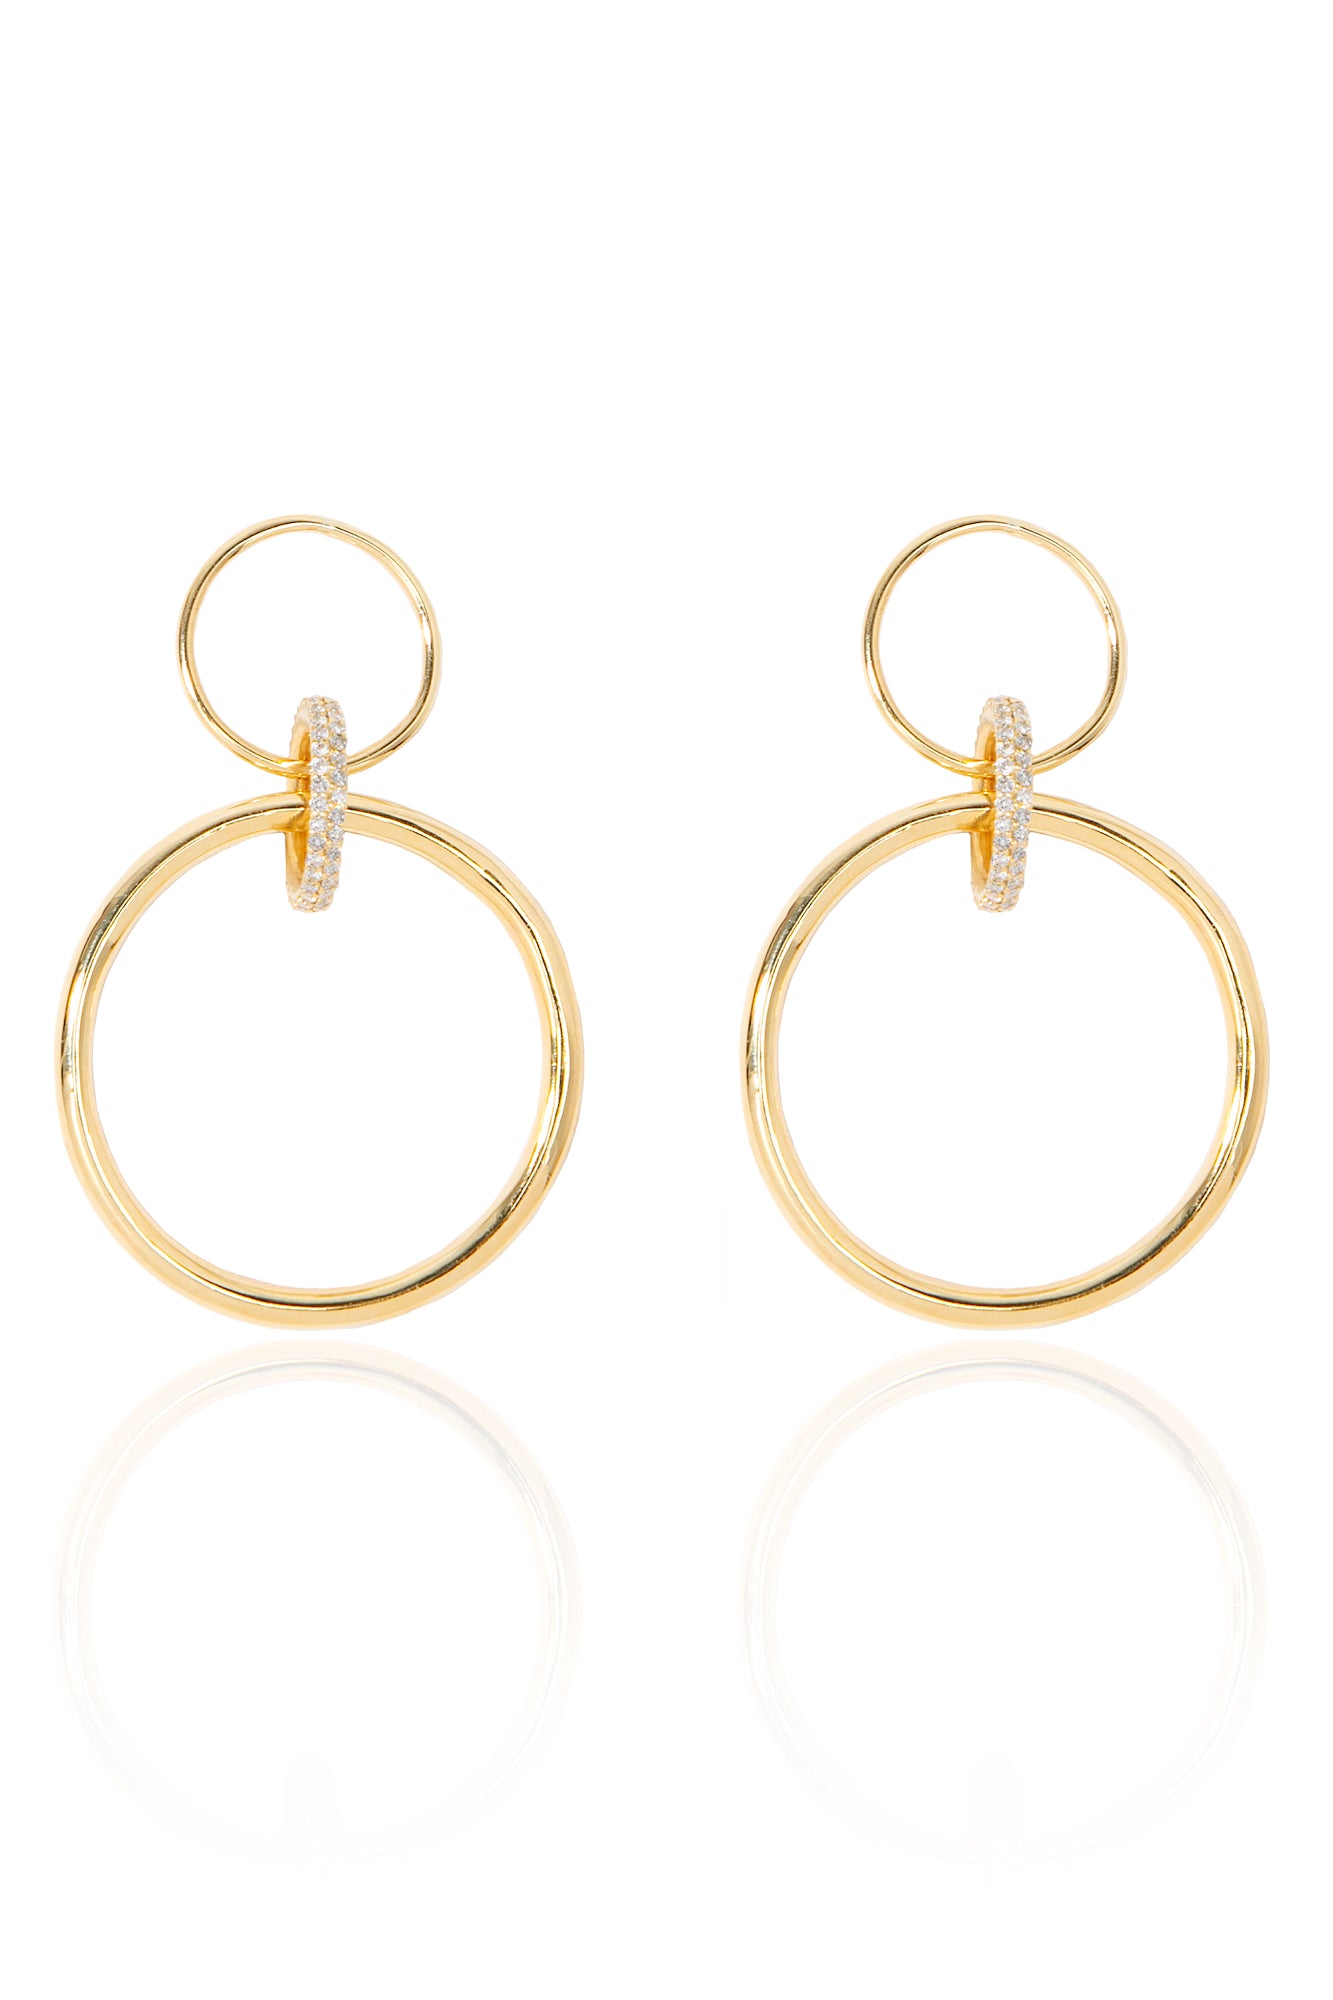 L.A. STEIN Diamond Mini Twisted Trinity Hoops in Yellow Gold